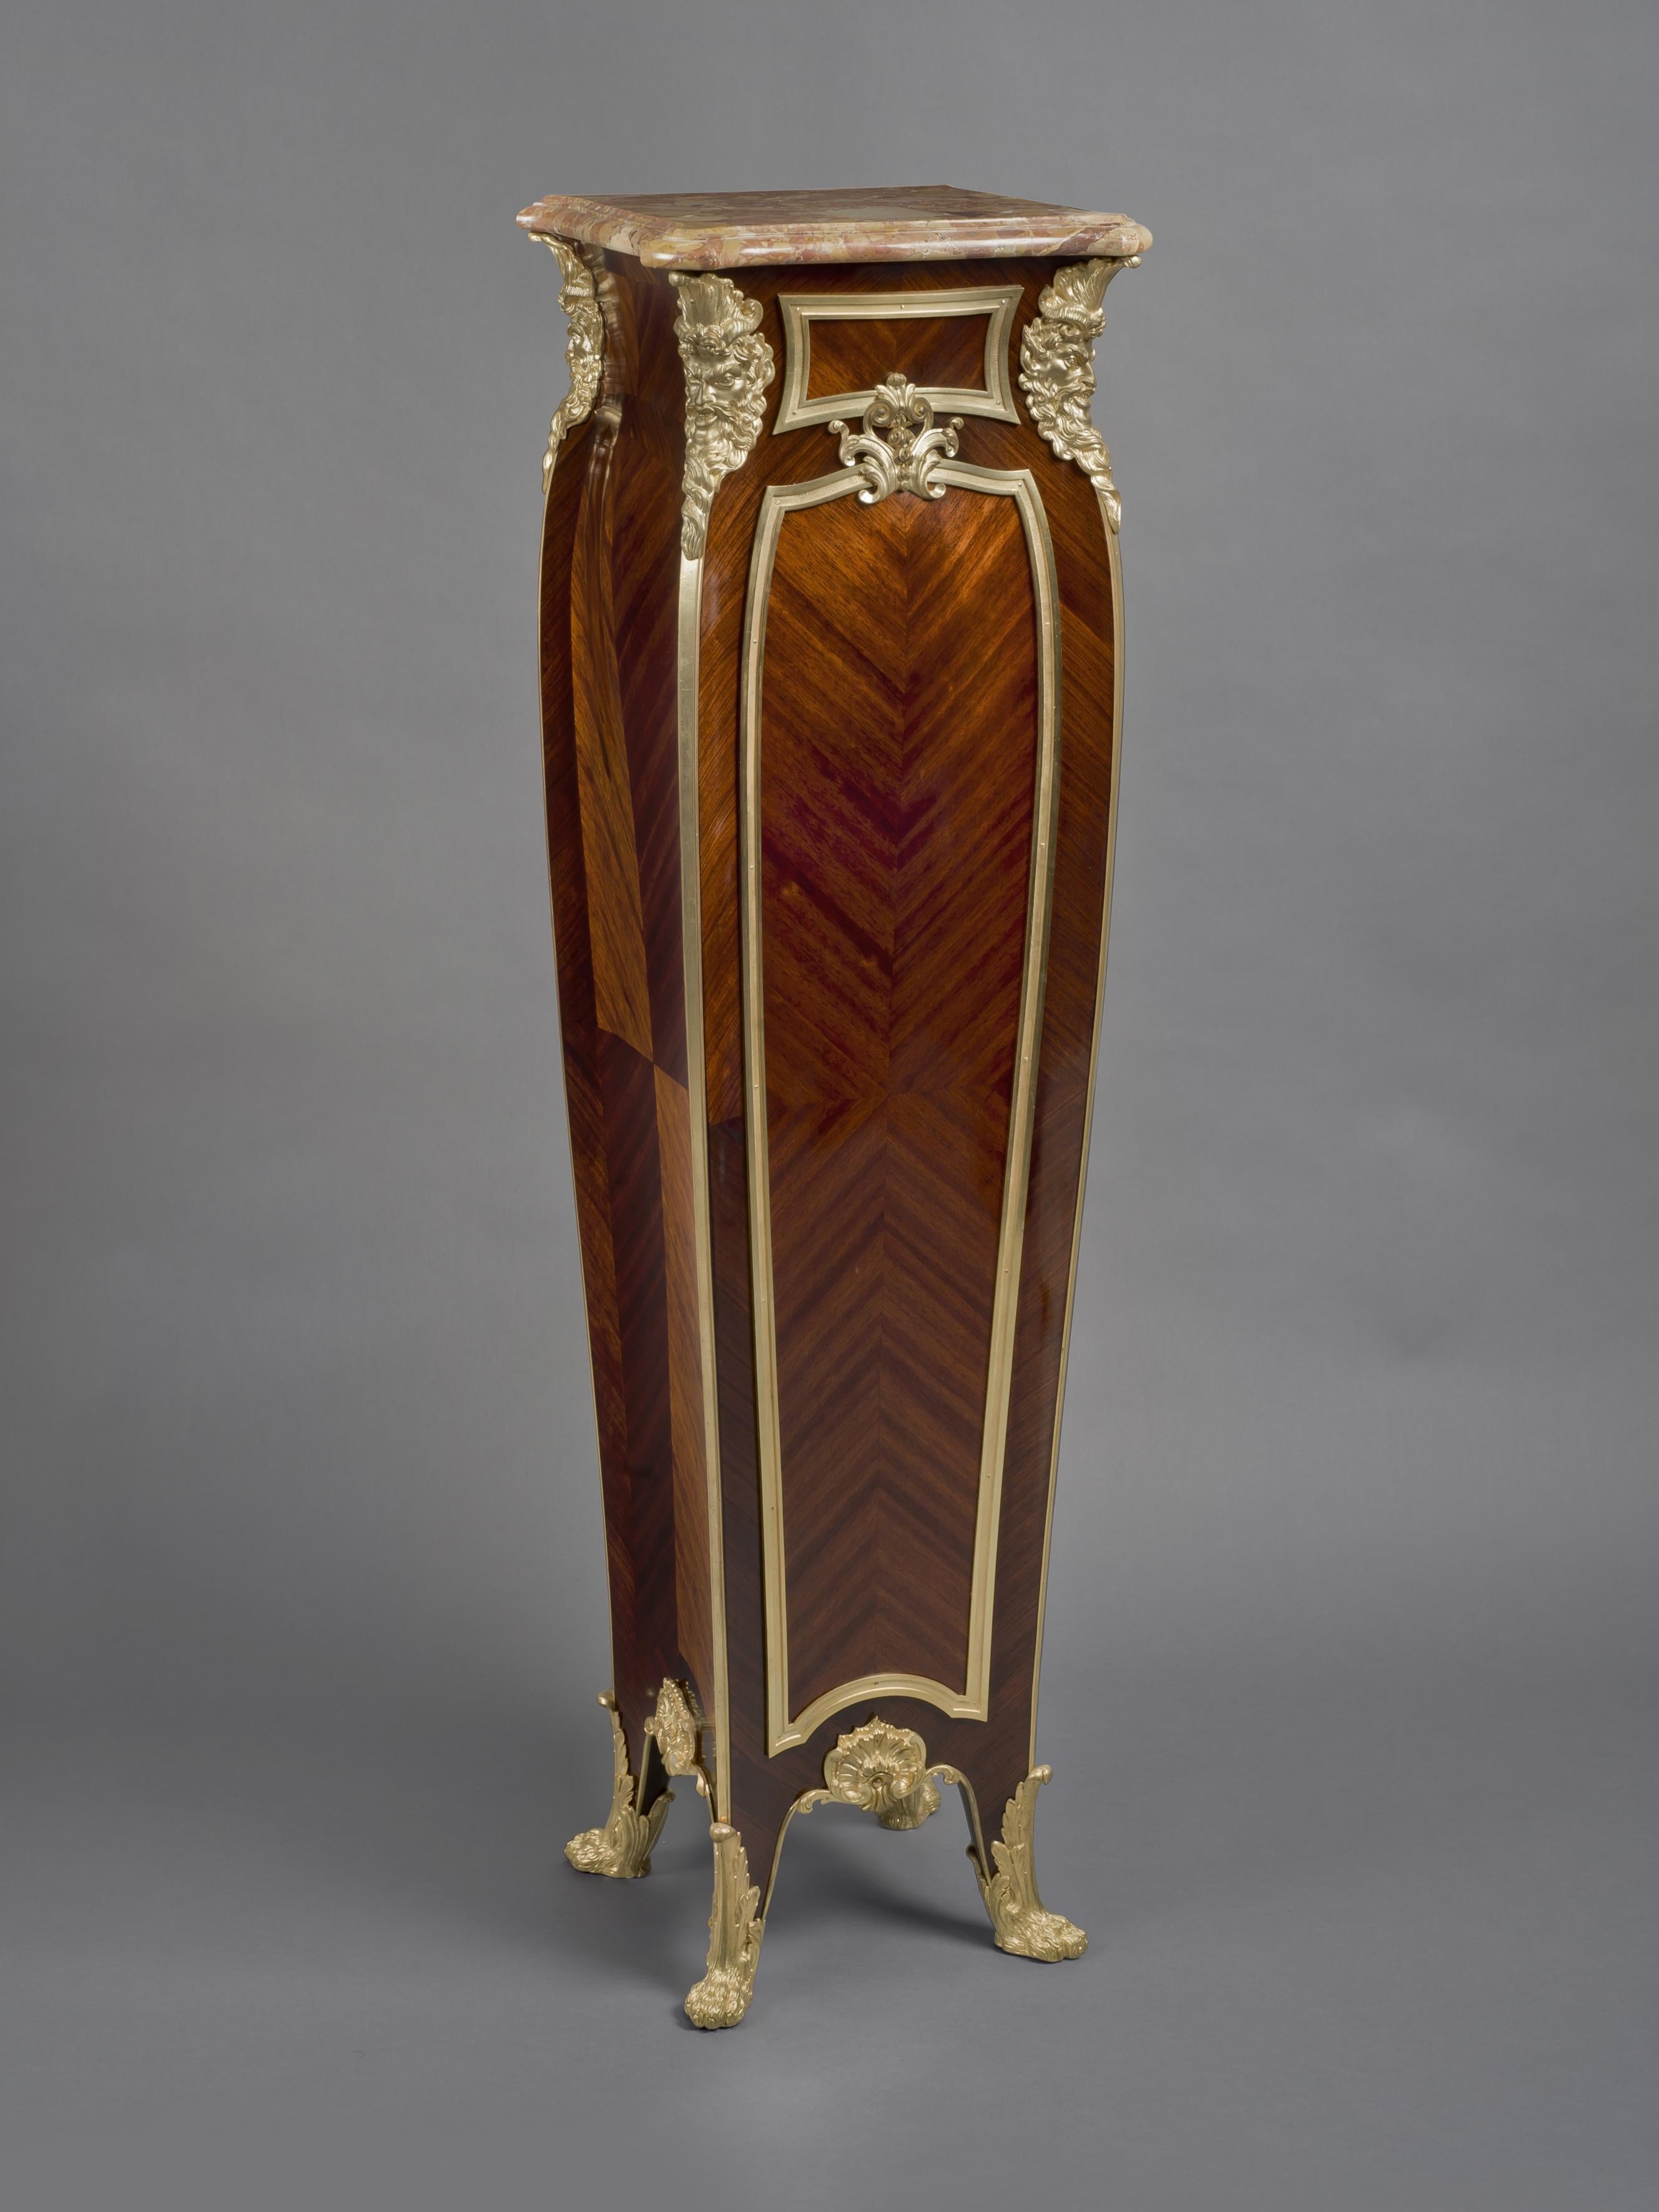 A fine Louis XV style gilt bronze mounted pedestal, by Zwiener Jansen Successeur.

French, circa 1900.

Stamped to the reverse of the bronze mounts 'ZJ' for Zwiener Jansen.

This Fine pedestal has a shaped breche d'alep marble top above a